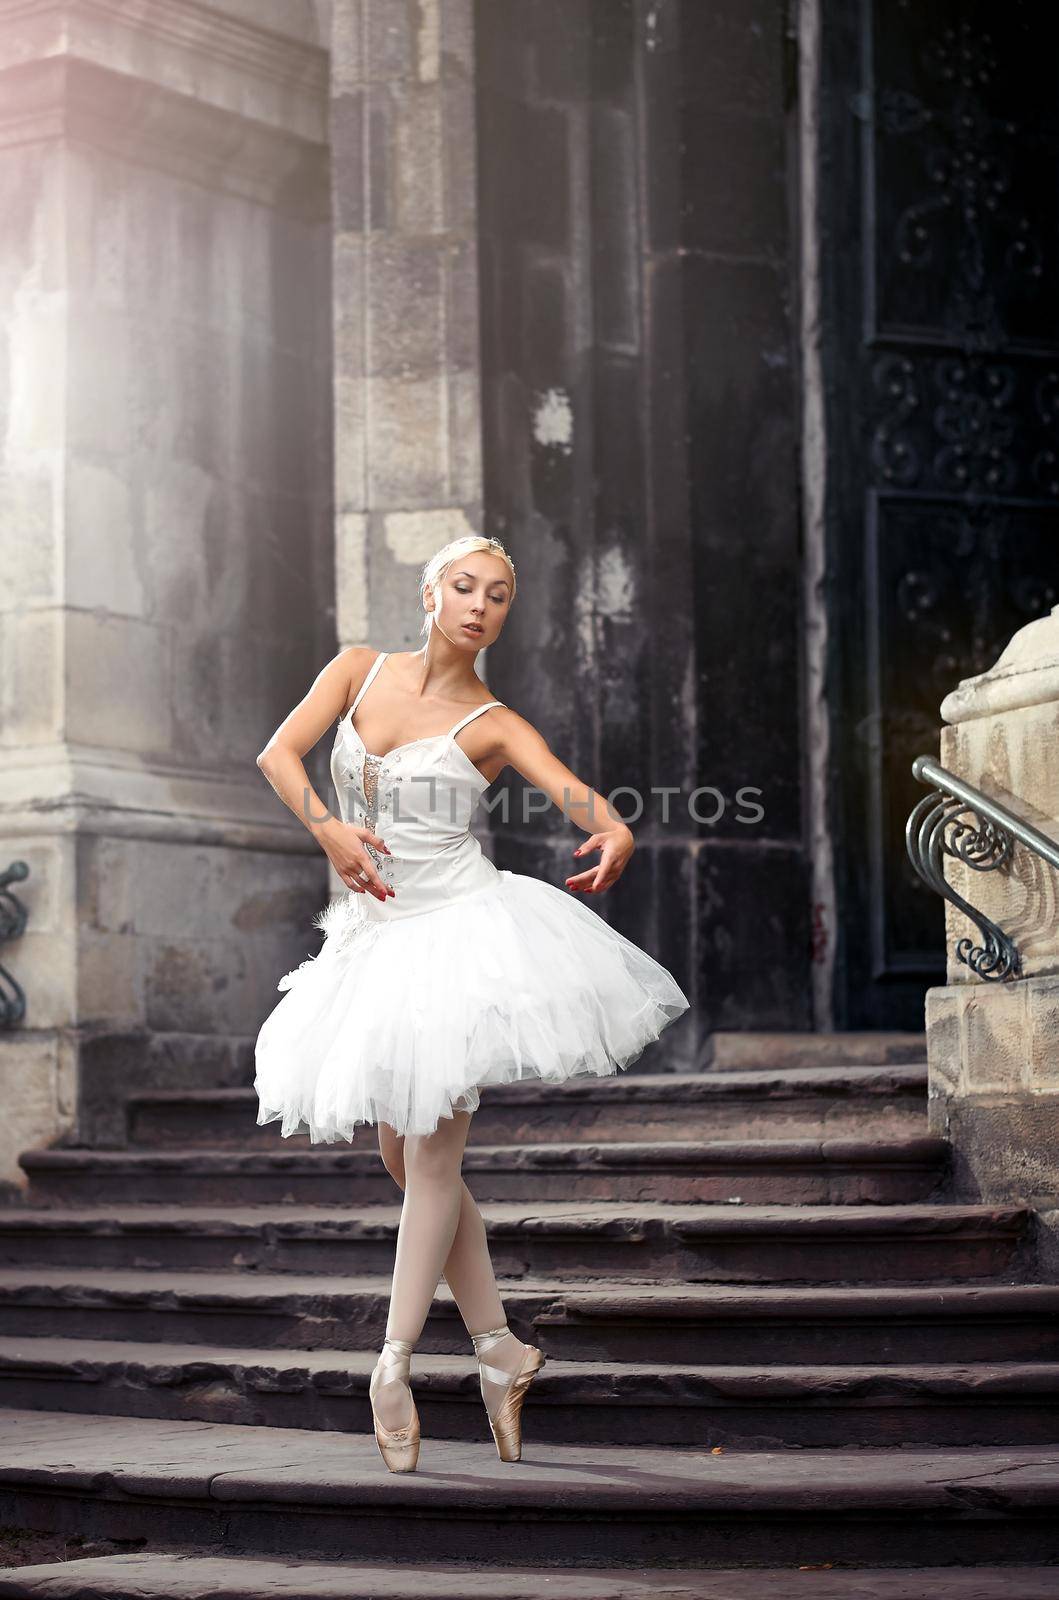 Motions of grace. Soft focus shot of a young female ballet dancer practicing on the stairway of an old building